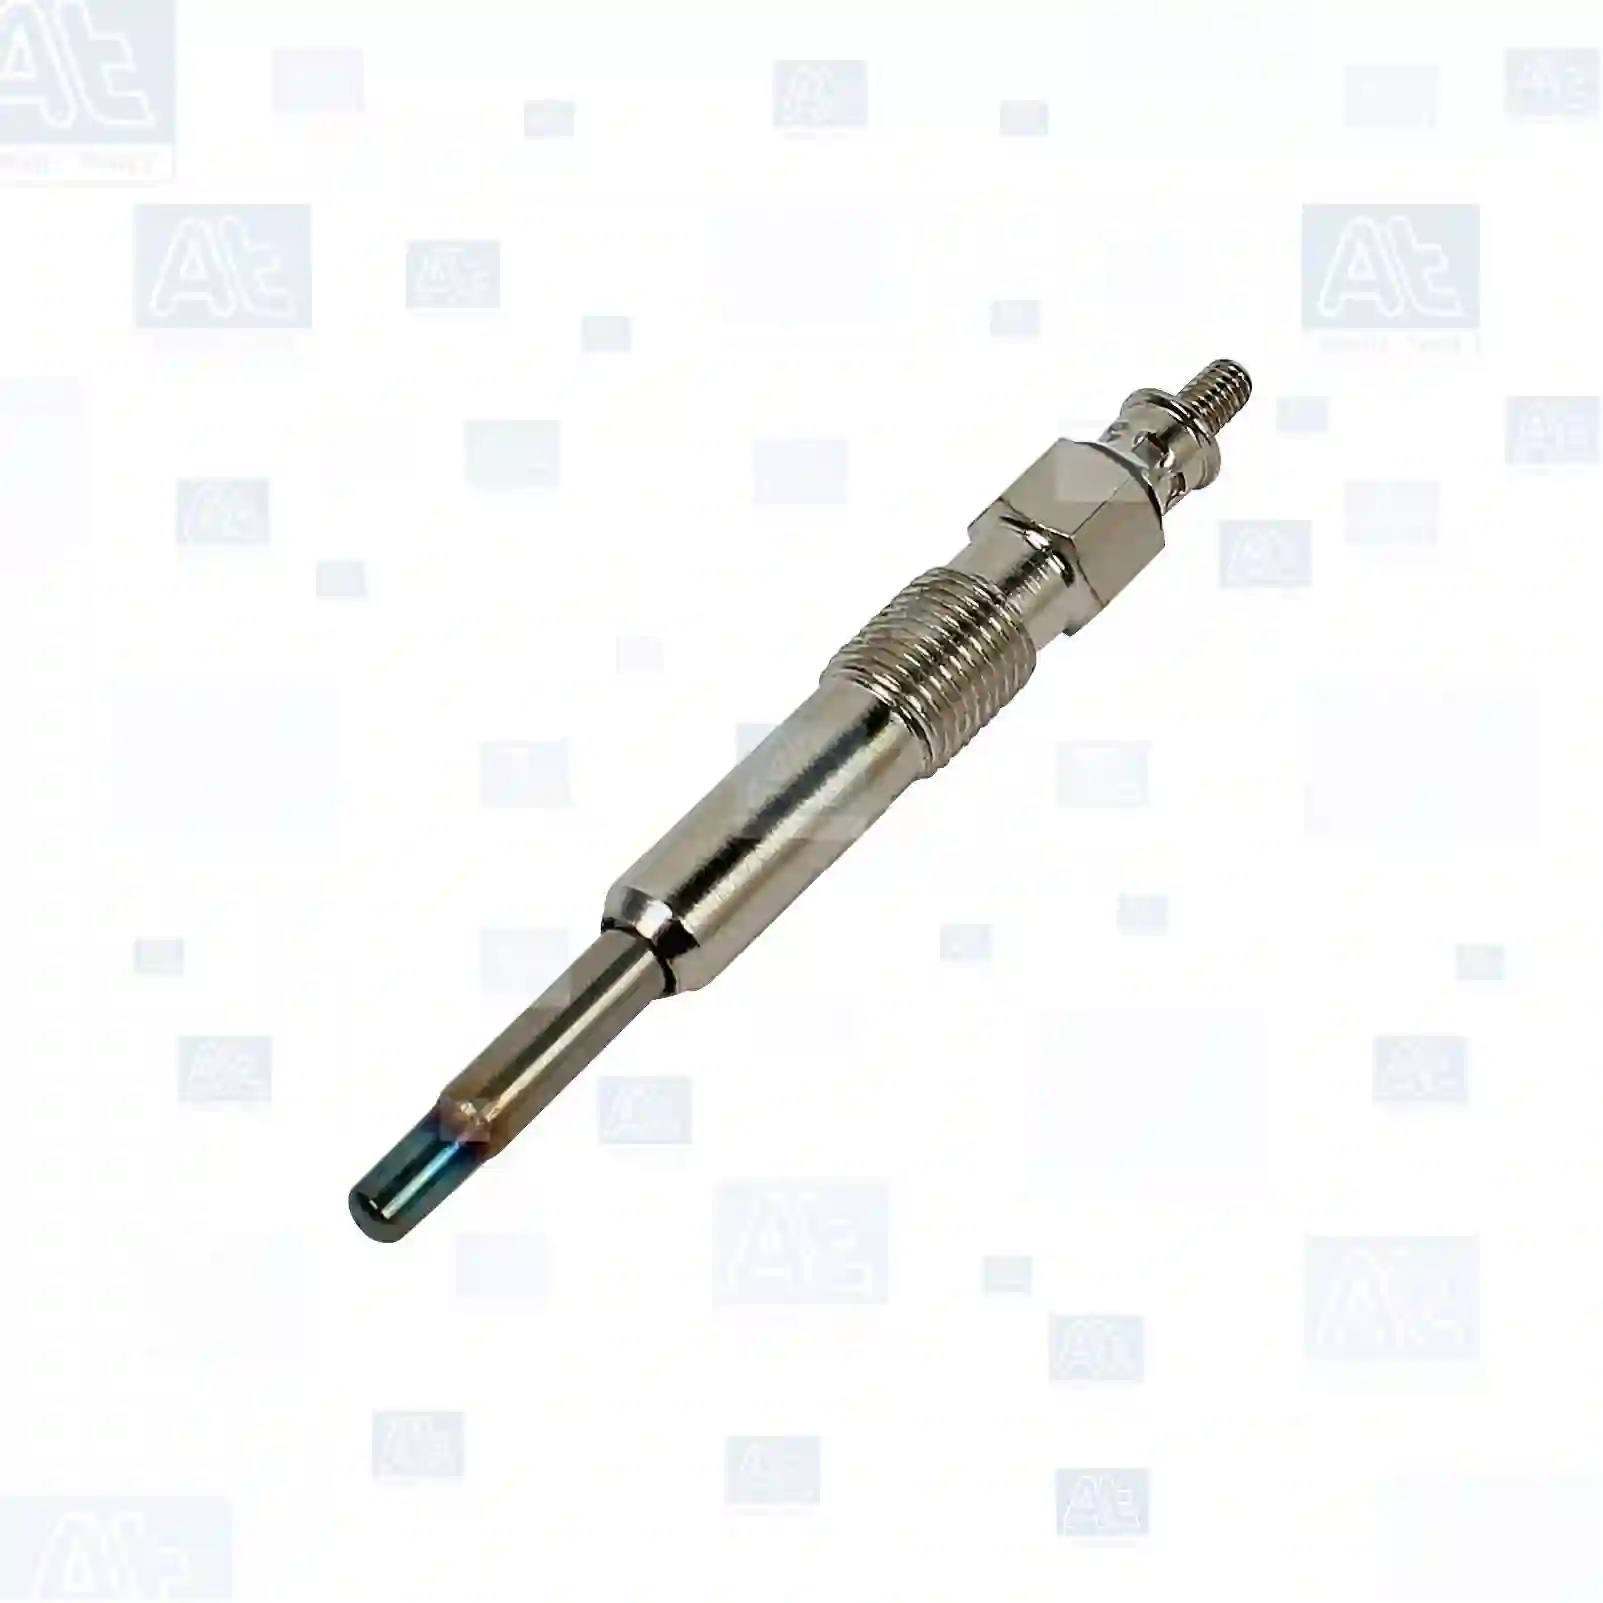 Glow plug, at no 77700619, oem no: 606517002, 60617002, 71735465, N10579201, N10579202, 46072003F, 4863826, 4863826AA, 7700100558, 8671012306, 4863826, 606517002, 60617002, 61617002, 71735465, 1207068, 1207069, 1517247, 1690048, 95DD6M090AA, EZD36, V95DD6M090AA, 1214053, 1214427, 32017512, 88900716, 9110945, 91153919, 93186027, 93192629, 4863826, 4863826AA, 60617002, 61617002, 1214053, 1214427, 4402945, 4418163, 6001545515, 7700100558, 8200423224, 8200423227, 8671012306, NCC100080, NCC100080L, N10579201, N10579202, N10579201, N10579202, N10579201, N10579202 At Spare Part | Engine, Accelerator Pedal, Camshaft, Connecting Rod, Crankcase, Crankshaft, Cylinder Head, Engine Suspension Mountings, Exhaust Manifold, Exhaust Gas Recirculation, Filter Kits, Flywheel Housing, General Overhaul Kits, Engine, Intake Manifold, Oil Cleaner, Oil Cooler, Oil Filter, Oil Pump, Oil Sump, Piston & Liner, Sensor & Switch, Timing Case, Turbocharger, Cooling System, Belt Tensioner, Coolant Filter, Coolant Pipe, Corrosion Prevention Agent, Drive, Expansion Tank, Fan, Intercooler, Monitors & Gauges, Radiator, Thermostat, V-Belt / Timing belt, Water Pump, Fuel System, Electronical Injector Unit, Feed Pump, Fuel Filter, cpl., Fuel Gauge Sender,  Fuel Line, Fuel Pump, Fuel Tank, Injection Line Kit, Injection Pump, Exhaust System, Clutch & Pedal, Gearbox, Propeller Shaft, Axles, Brake System, Hubs & Wheels, Suspension, Leaf Spring, Universal Parts / Accessories, Steering, Electrical System, Cabin Glow plug, at no 77700619, oem no: 606517002, 60617002, 71735465, N10579201, N10579202, 46072003F, 4863826, 4863826AA, 7700100558, 8671012306, 4863826, 606517002, 60617002, 61617002, 71735465, 1207068, 1207069, 1517247, 1690048, 95DD6M090AA, EZD36, V95DD6M090AA, 1214053, 1214427, 32017512, 88900716, 9110945, 91153919, 93186027, 93192629, 4863826, 4863826AA, 60617002, 61617002, 1214053, 1214427, 4402945, 4418163, 6001545515, 7700100558, 8200423224, 8200423227, 8671012306, NCC100080, NCC100080L, N10579201, N10579202, N10579201, N10579202, N10579201, N10579202 At Spare Part | Engine, Accelerator Pedal, Camshaft, Connecting Rod, Crankcase, Crankshaft, Cylinder Head, Engine Suspension Mountings, Exhaust Manifold, Exhaust Gas Recirculation, Filter Kits, Flywheel Housing, General Overhaul Kits, Engine, Intake Manifold, Oil Cleaner, Oil Cooler, Oil Filter, Oil Pump, Oil Sump, Piston & Liner, Sensor & Switch, Timing Case, Turbocharger, Cooling System, Belt Tensioner, Coolant Filter, Coolant Pipe, Corrosion Prevention Agent, Drive, Expansion Tank, Fan, Intercooler, Monitors & Gauges, Radiator, Thermostat, V-Belt / Timing belt, Water Pump, Fuel System, Electronical Injector Unit, Feed Pump, Fuel Filter, cpl., Fuel Gauge Sender,  Fuel Line, Fuel Pump, Fuel Tank, Injection Line Kit, Injection Pump, Exhaust System, Clutch & Pedal, Gearbox, Propeller Shaft, Axles, Brake System, Hubs & Wheels, Suspension, Leaf Spring, Universal Parts / Accessories, Steering, Electrical System, Cabin